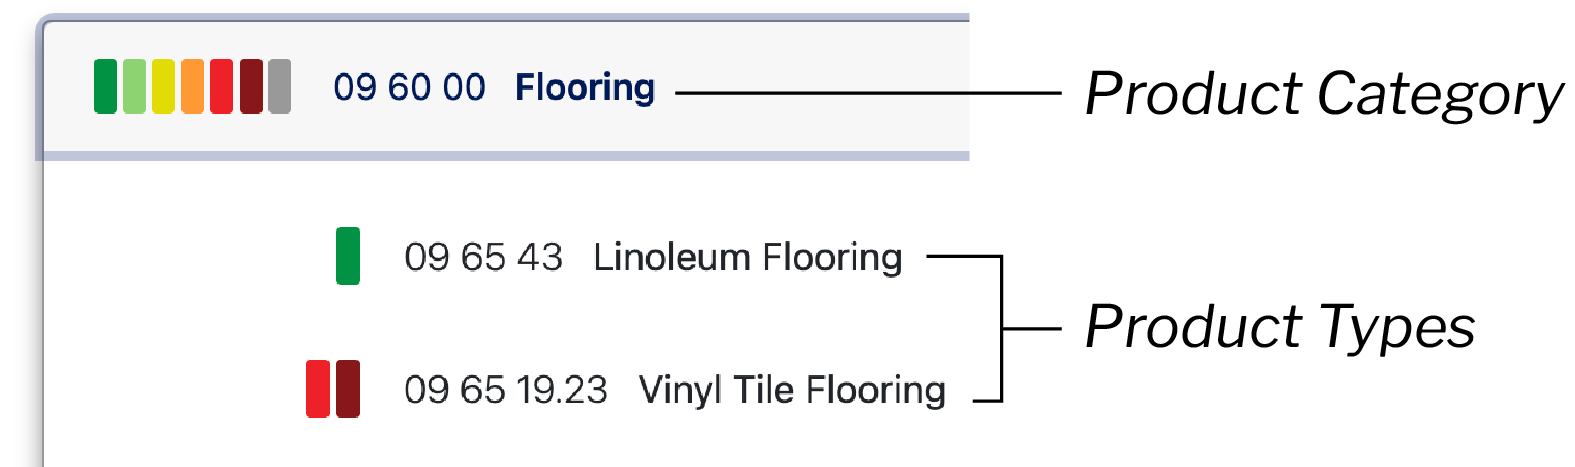 Example of product category vs type. Example product category is 09 60 00 Flooring, and example product types are 09 65 43 Linoleum Flooring and 09 65 19.23 Vinyl Tile Flooring.